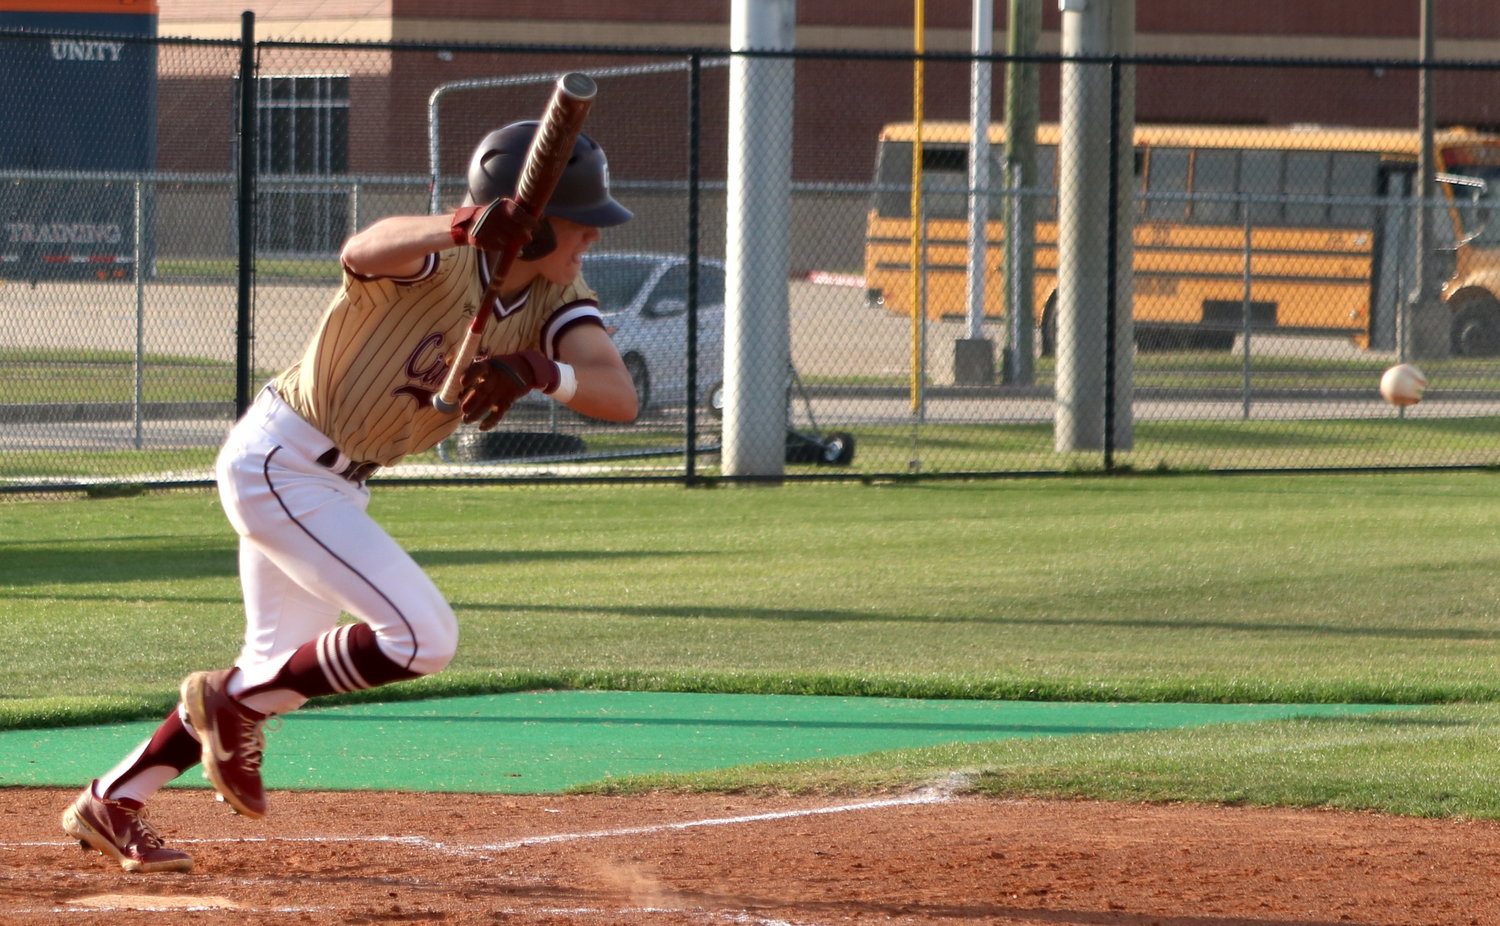 A Cinco Ranch player bunts during Friday’s District 19-6A  game between Seven Lakes and Cinco Ranch at the Seven Lakes baseball field.